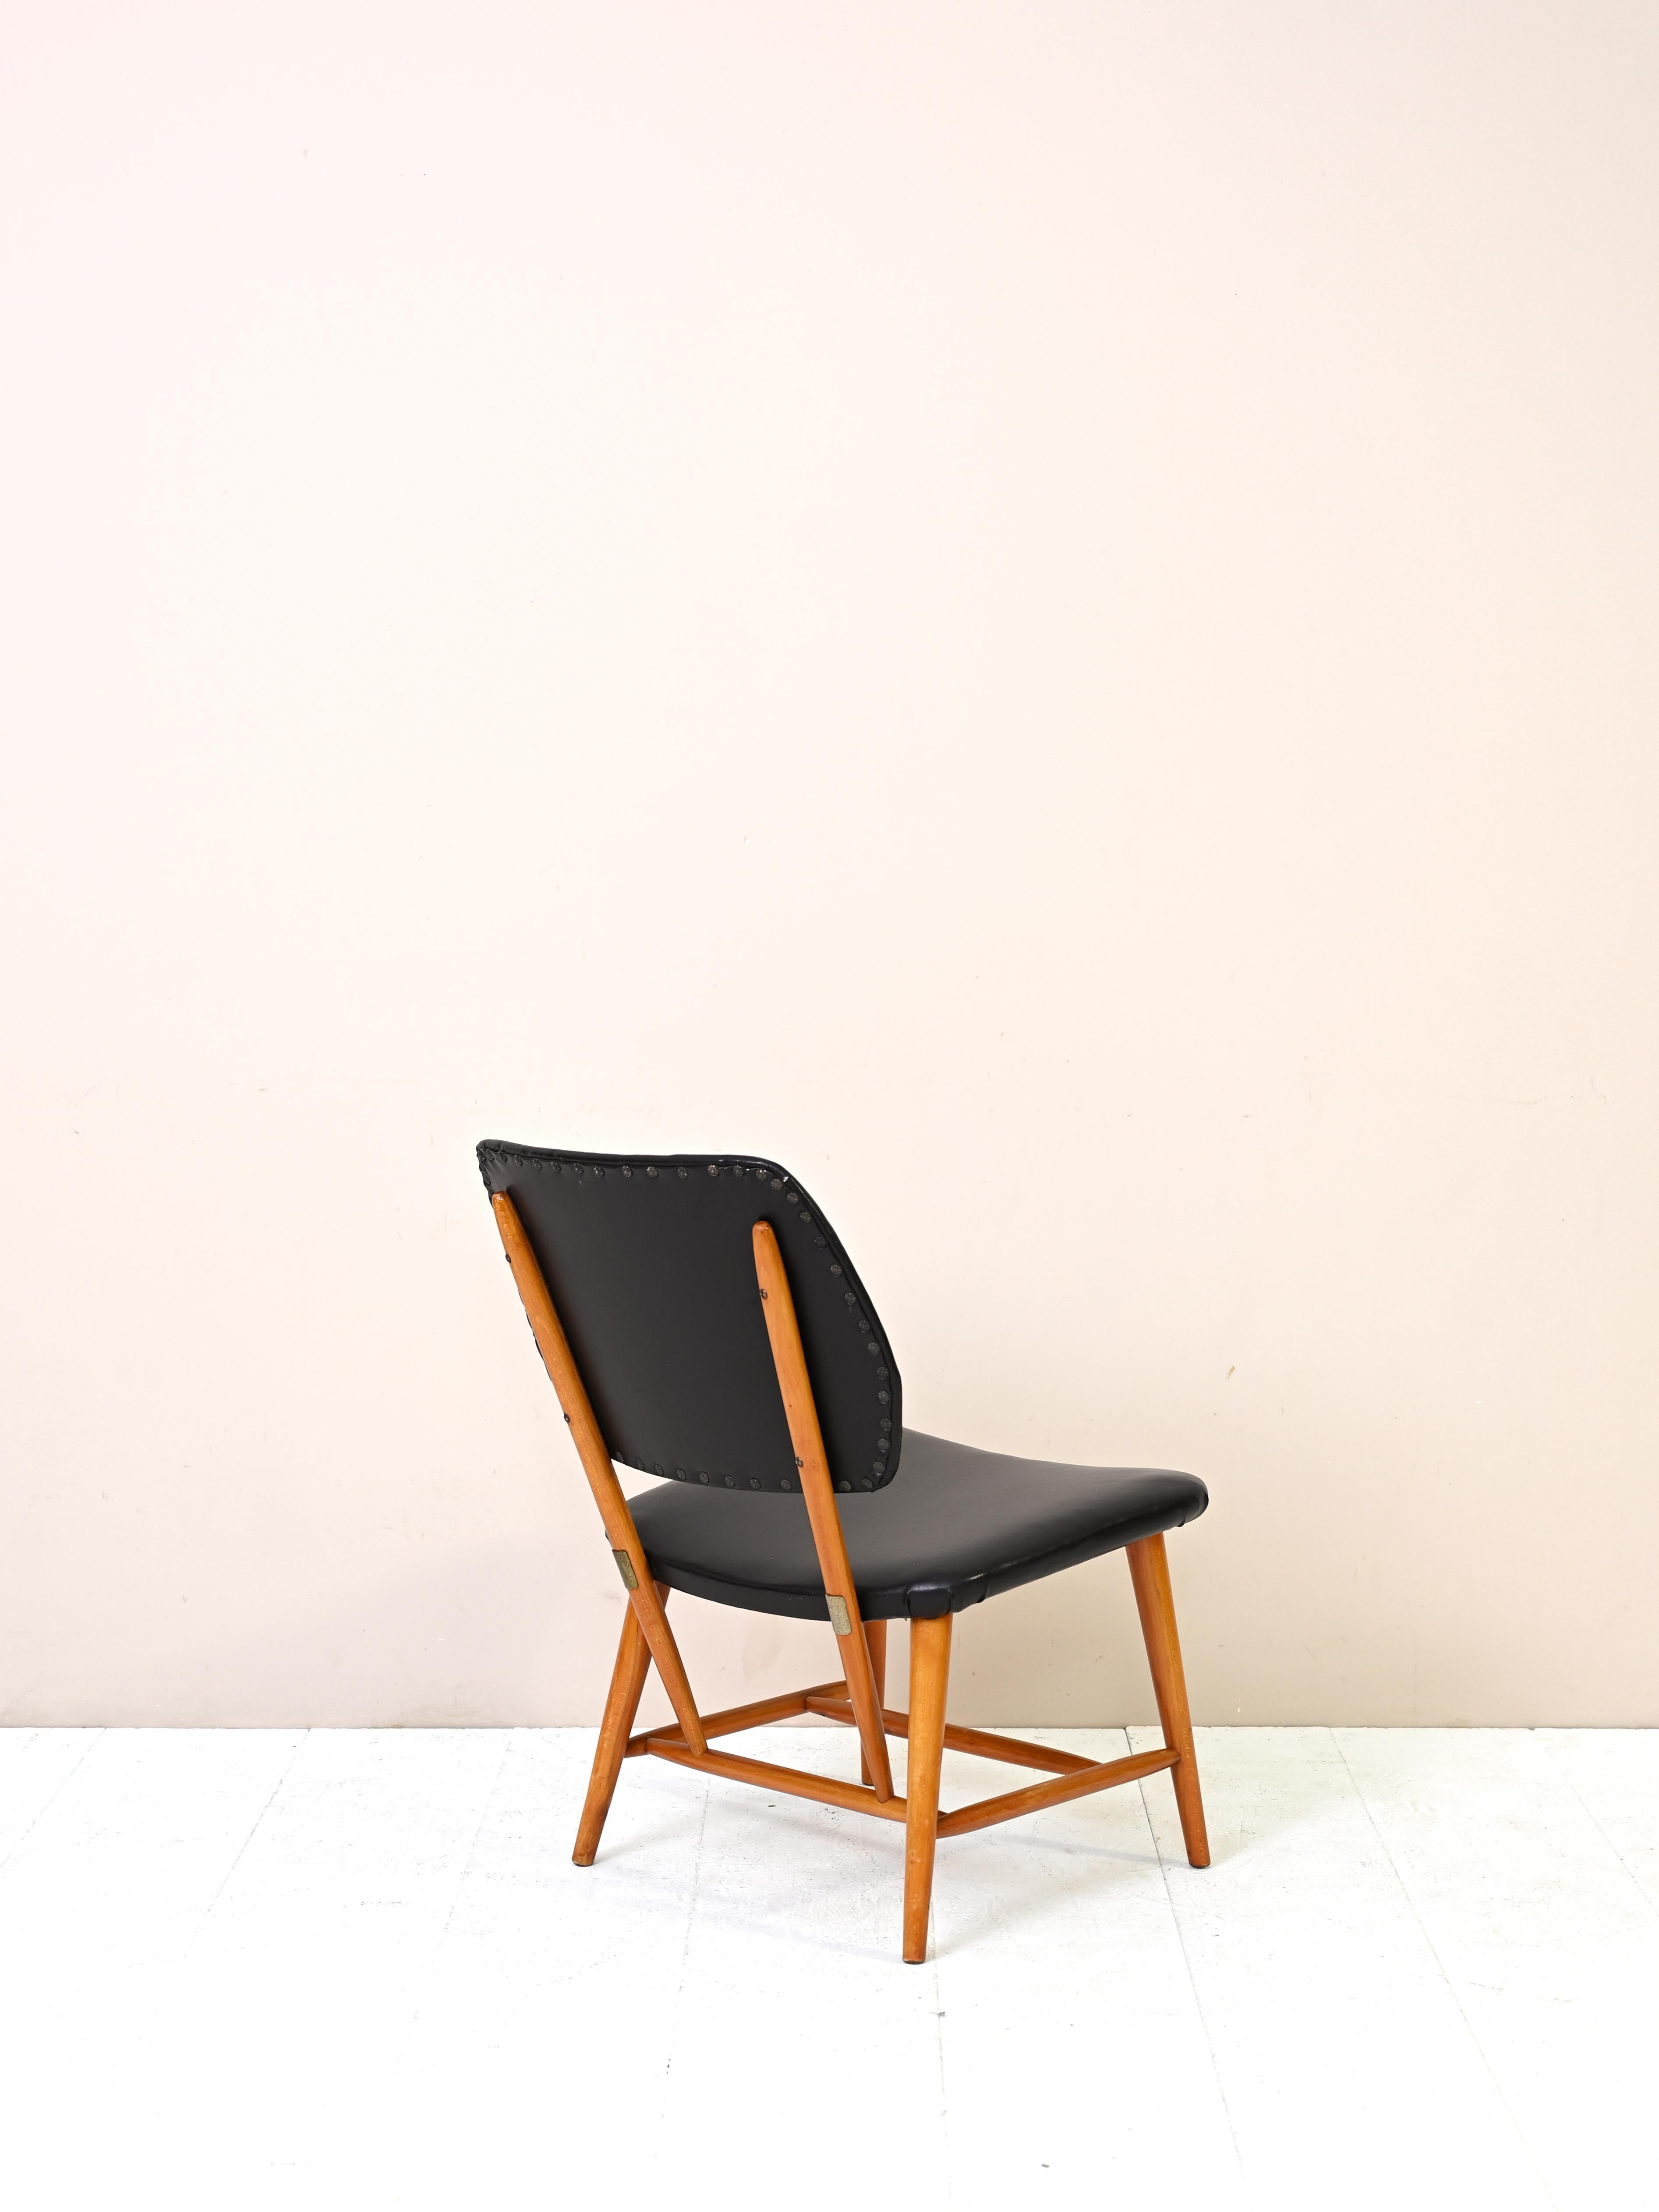 Wood and leather chair of original vintage Scandinavian manufacture from the 1950s.

This comfortable and timelessly beautiful chair can be placed in the living room or bedroom and will give the room a Nordic and elegant touch.

Good condition.